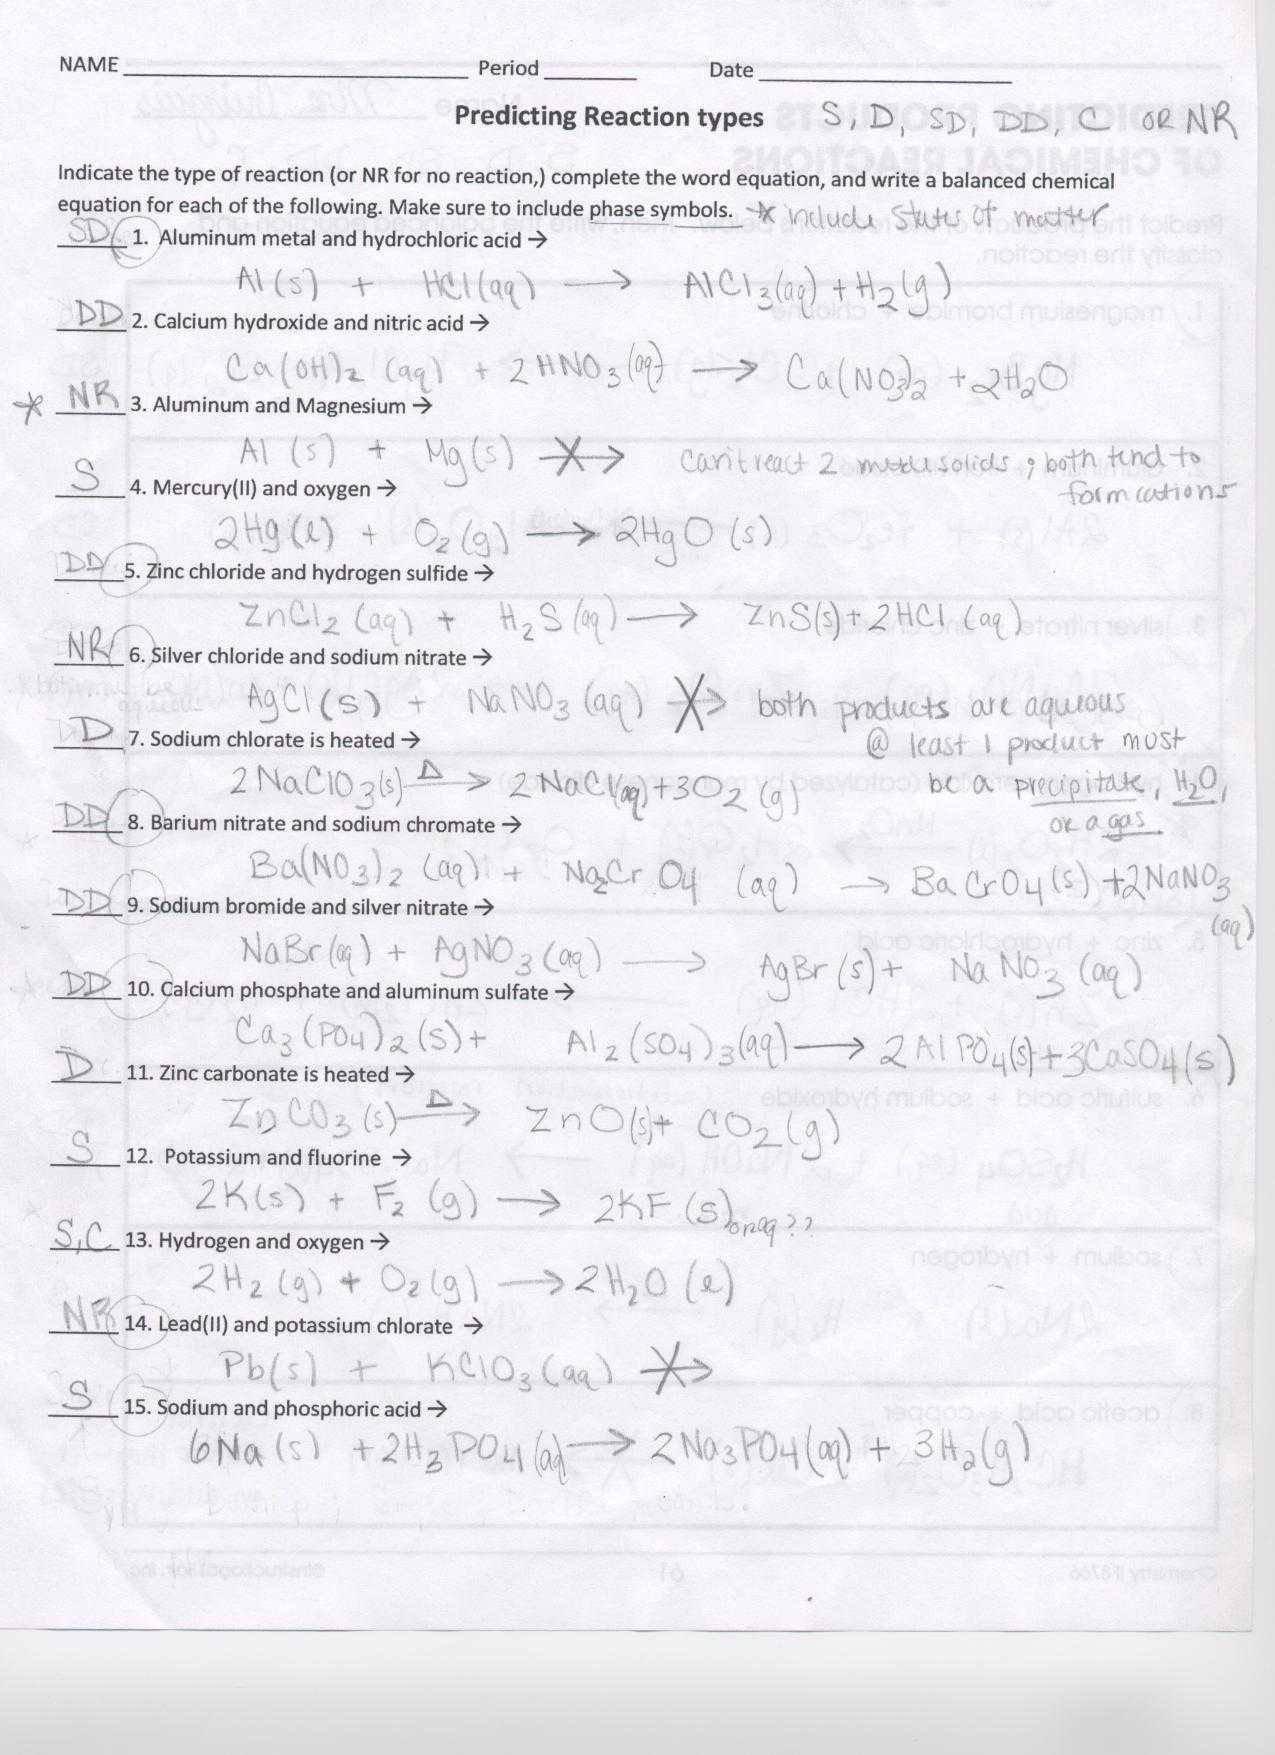 Gas Laws Practice Problems Worksheet Answers as Well as Miller and Levine Biology Chapter 12 assessment Answers Miller and